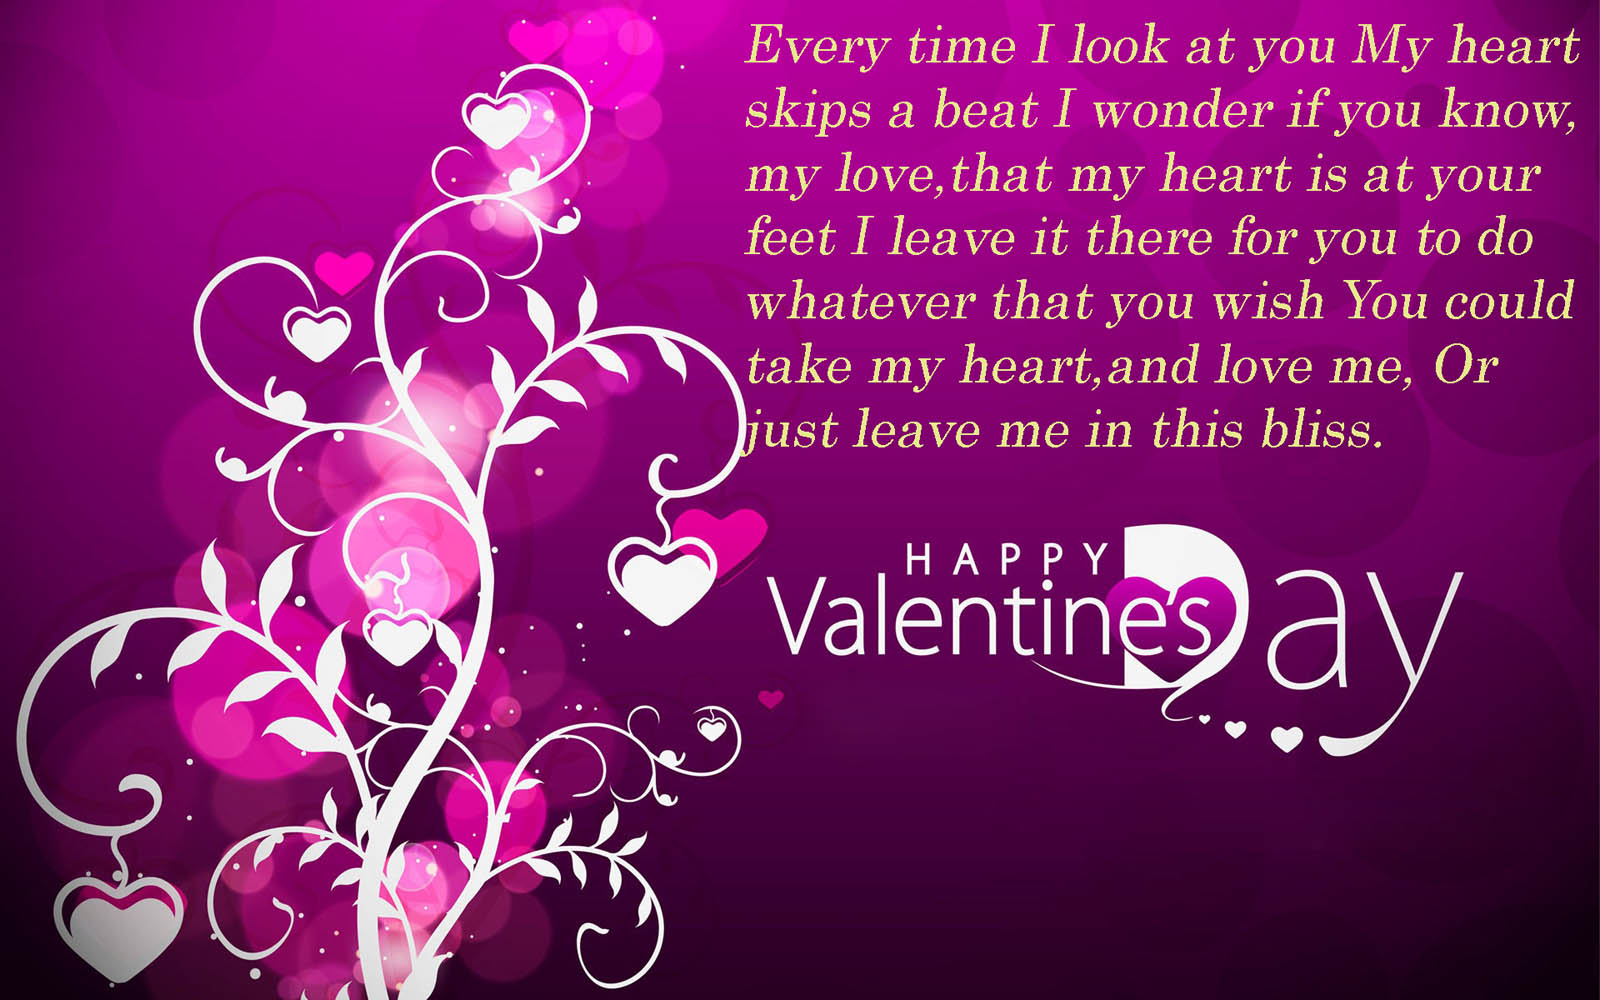 wallpapers: Valentines Day Greetings